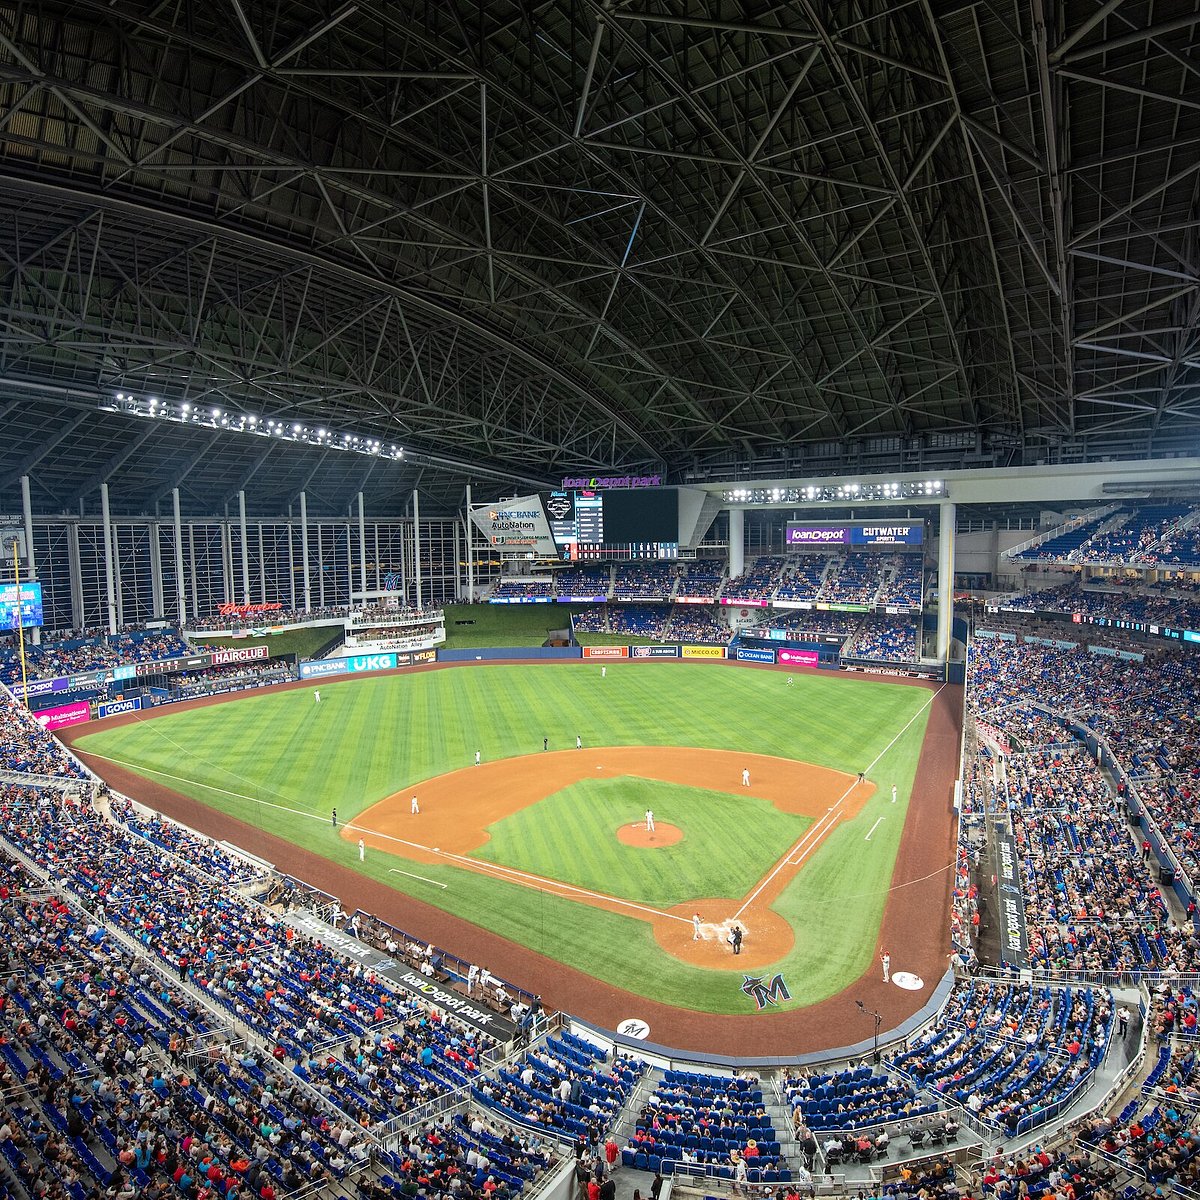 This is the history of the fish tanks at Marlins Park (now